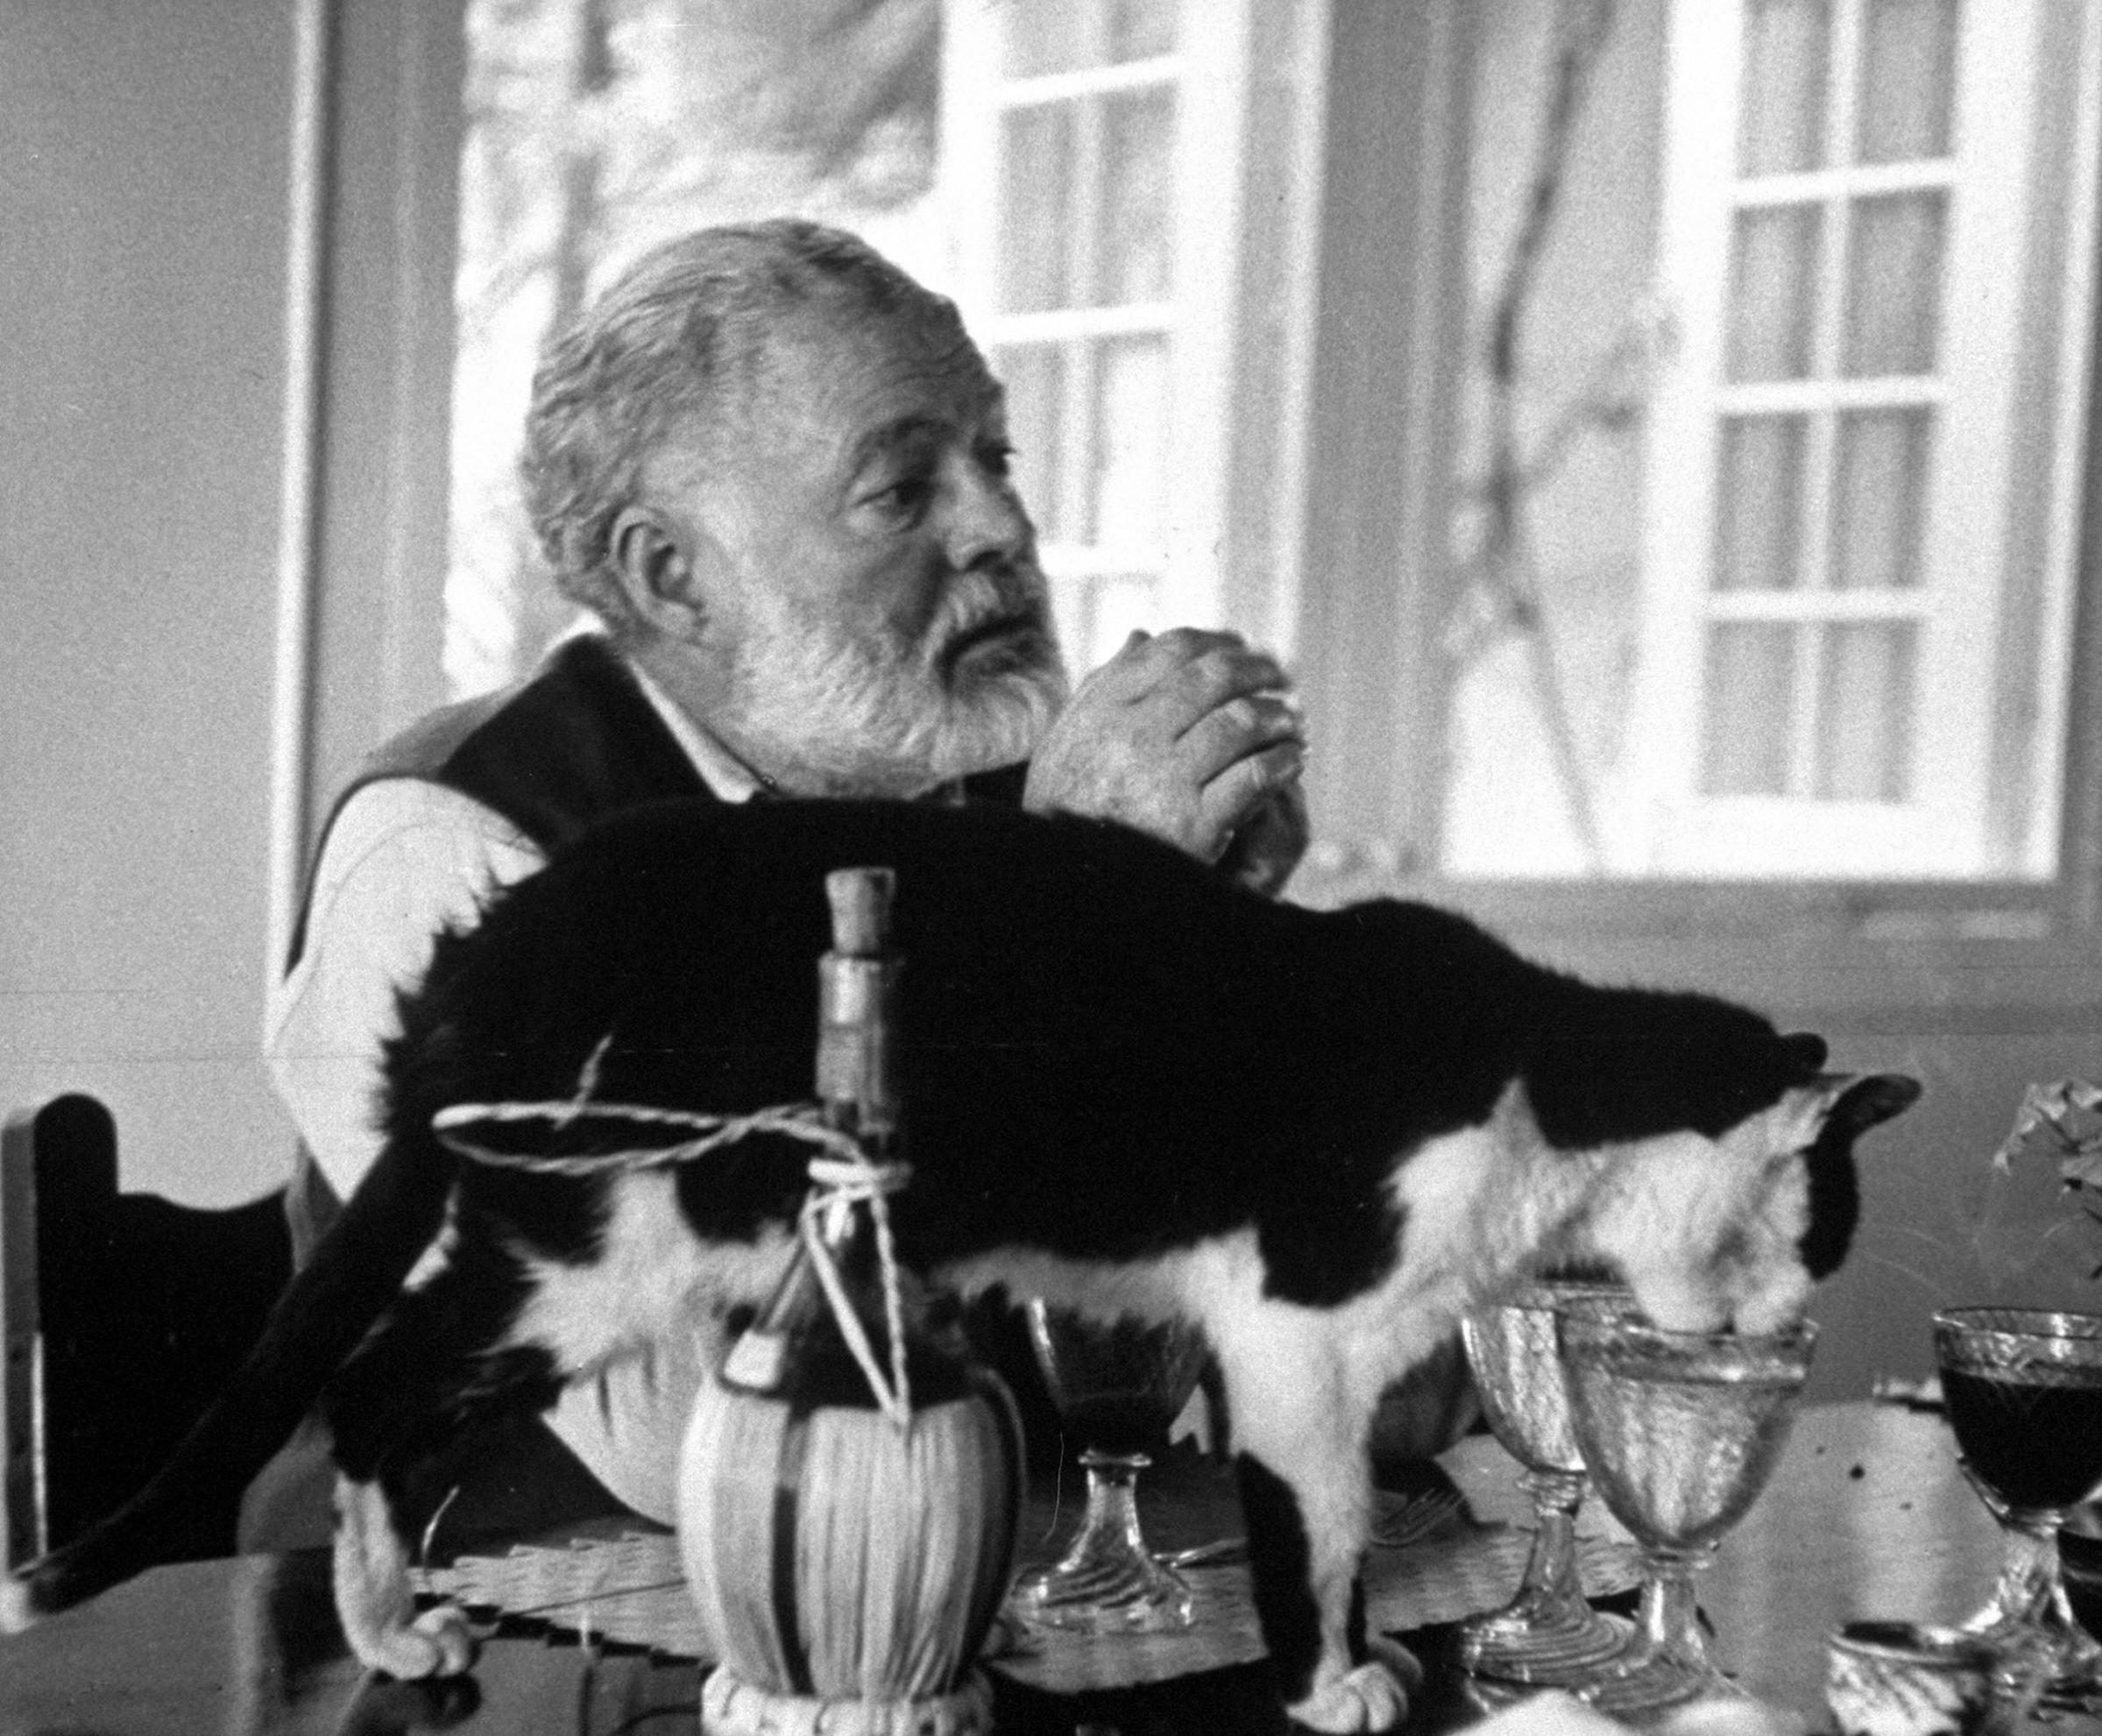 Ernest Hemingway sitting while a cat drinks out of a water glass on the table, 1959.